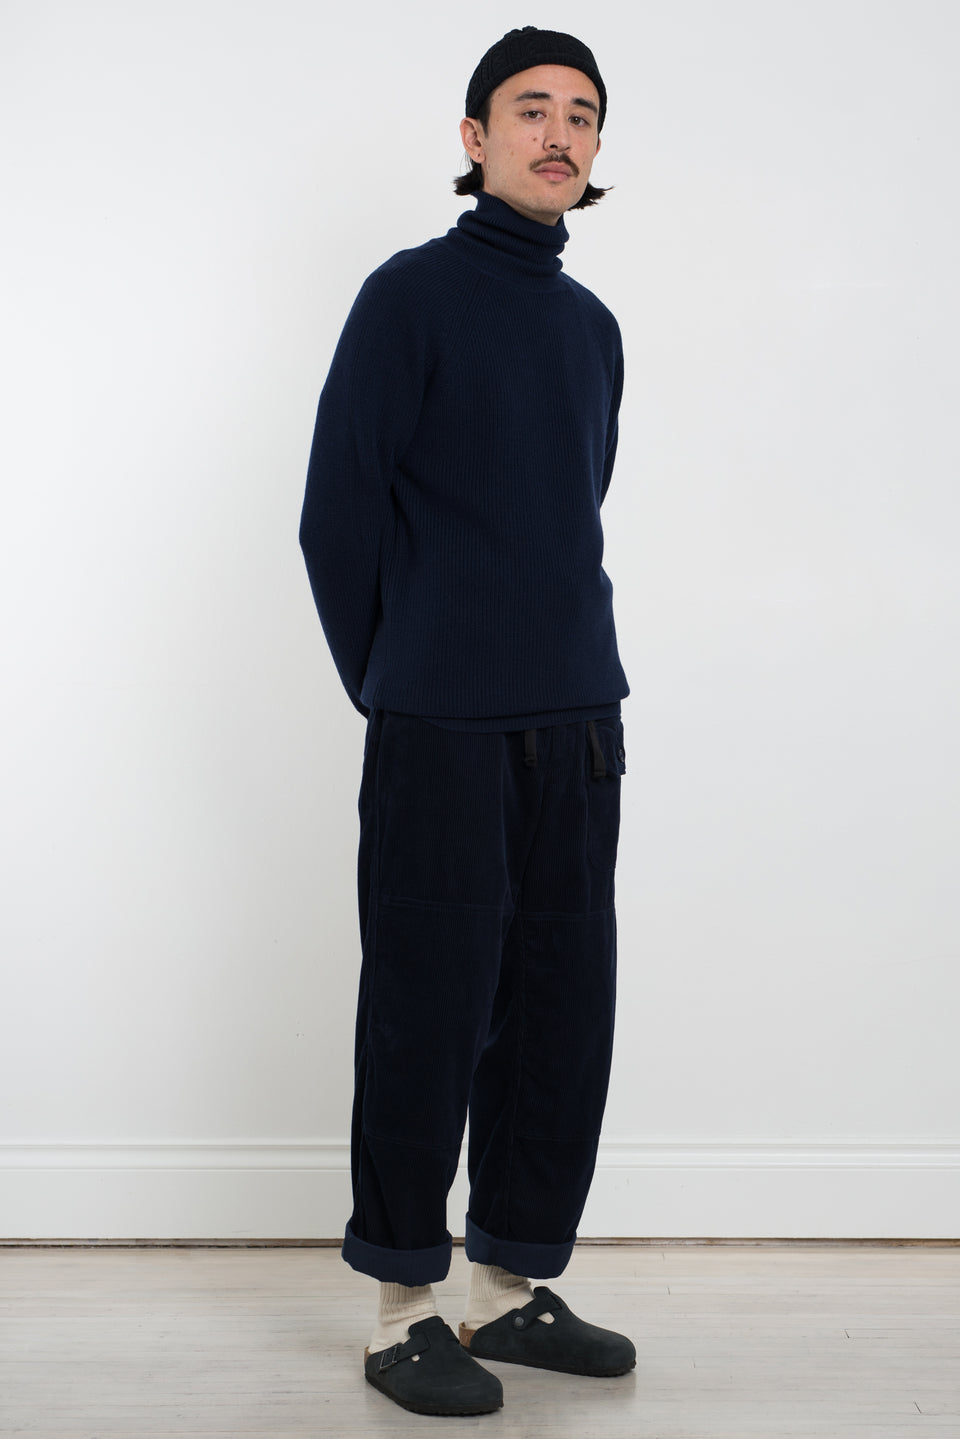 Engineered Garments FW22 Nepenthes NY Turtle Neck Fisherman Sweater Navy Wool Calculus Victoria BC Canada